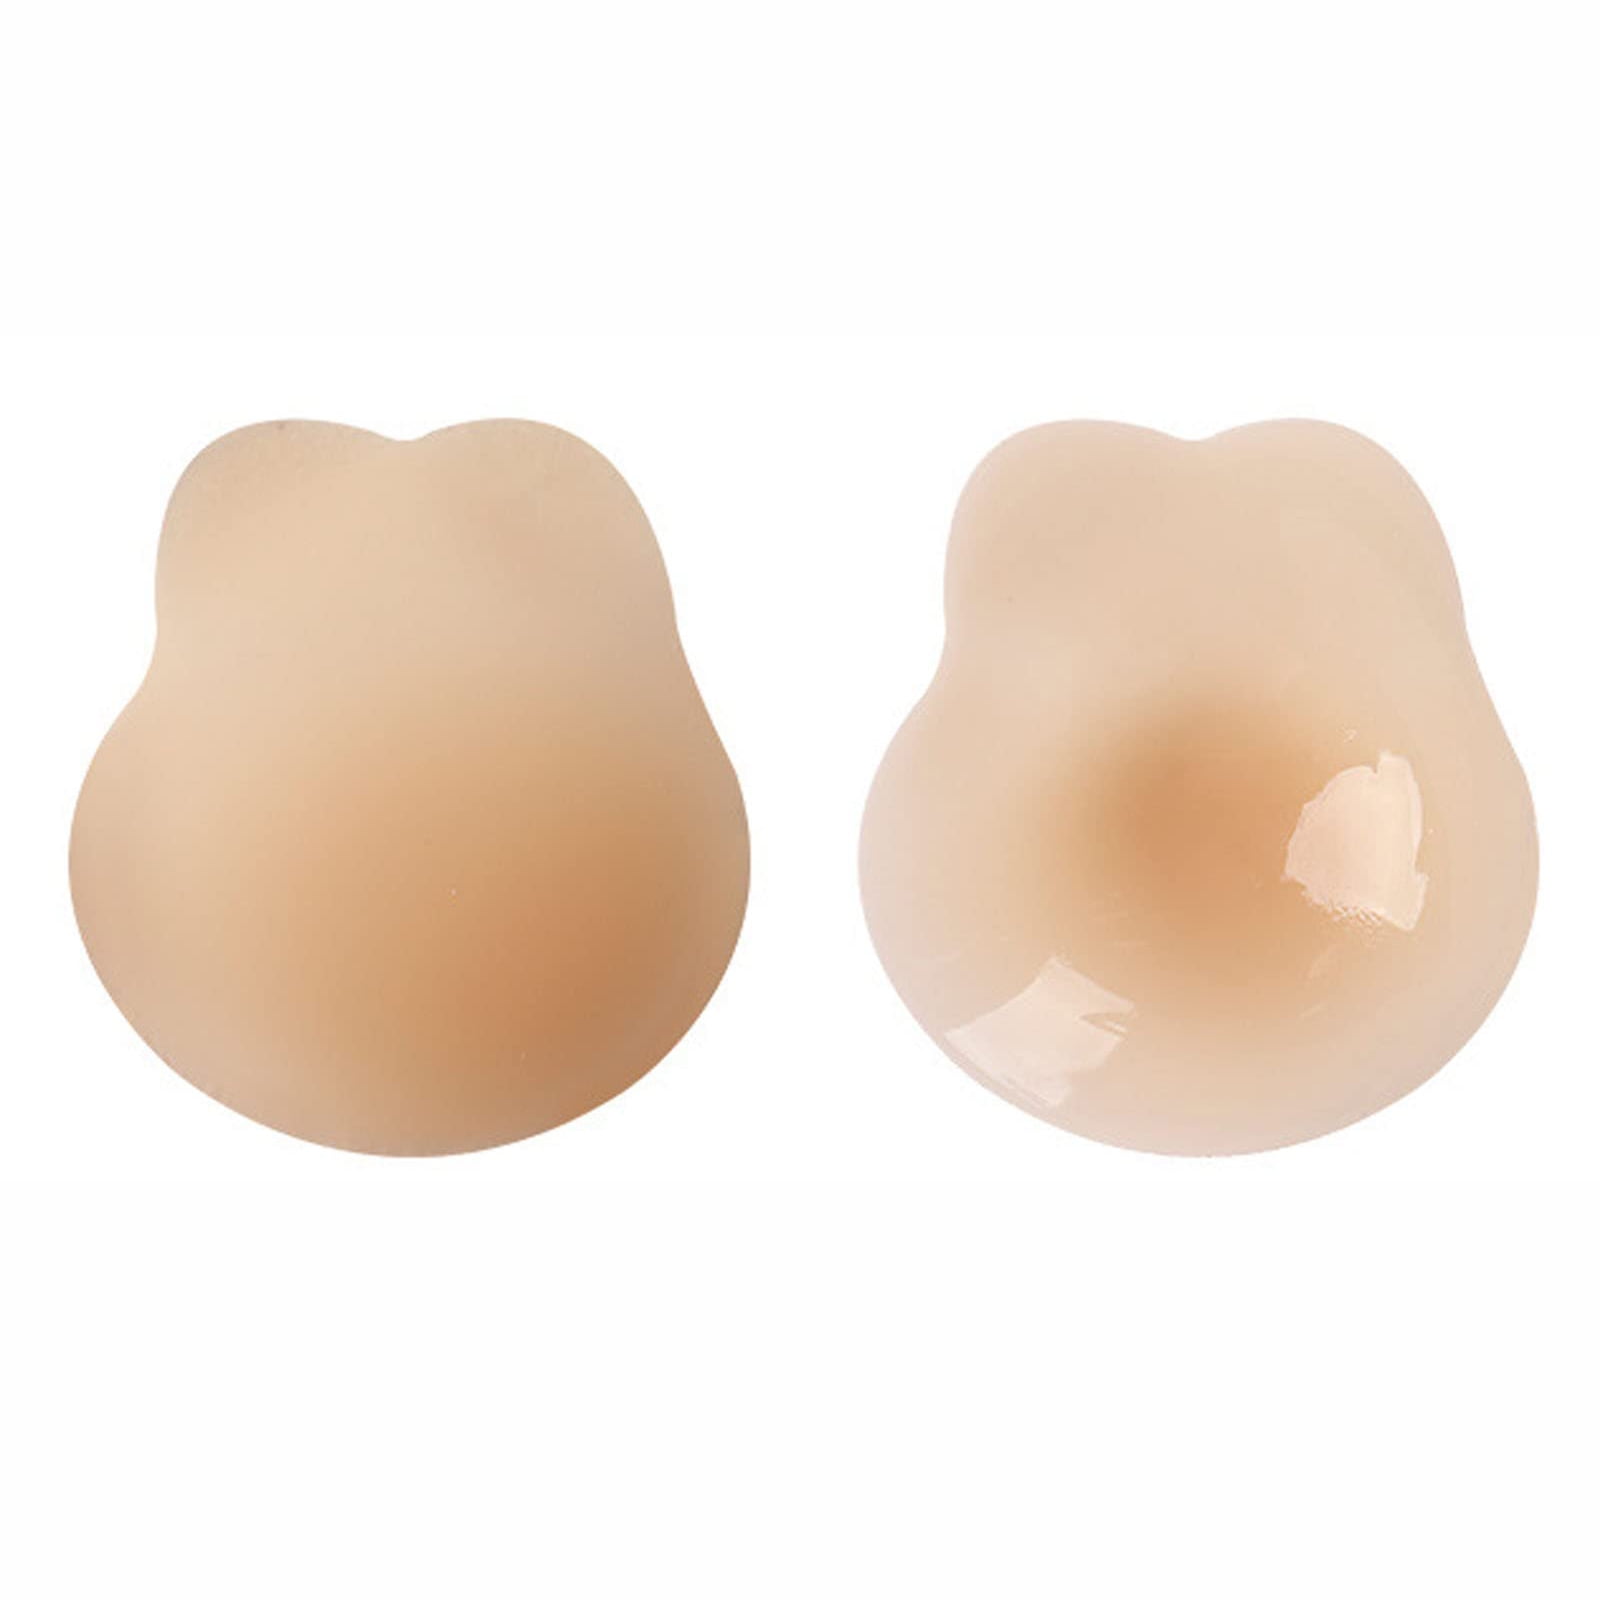 Reusable Adhesive Silicone Women Nipple Covers, Women Breast Lift Pasties  4 Round Shape - Beige